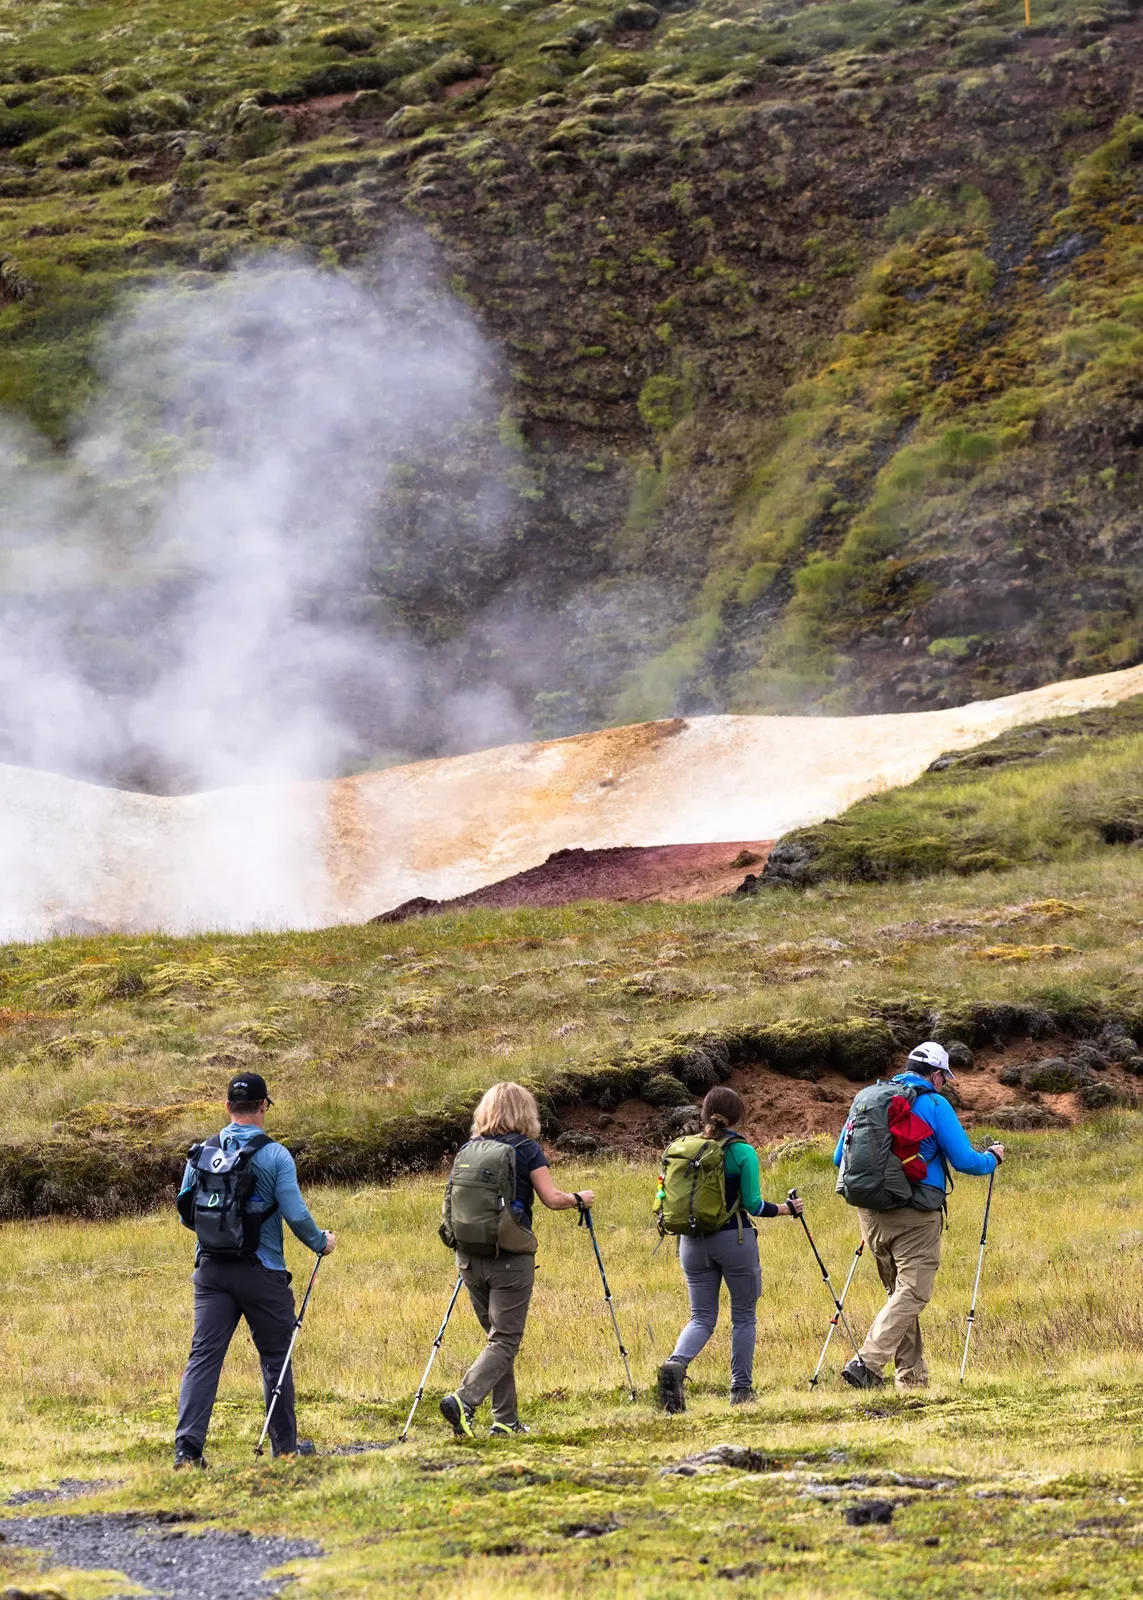 Four hikers with hiking sticks walking past a steaming geyser